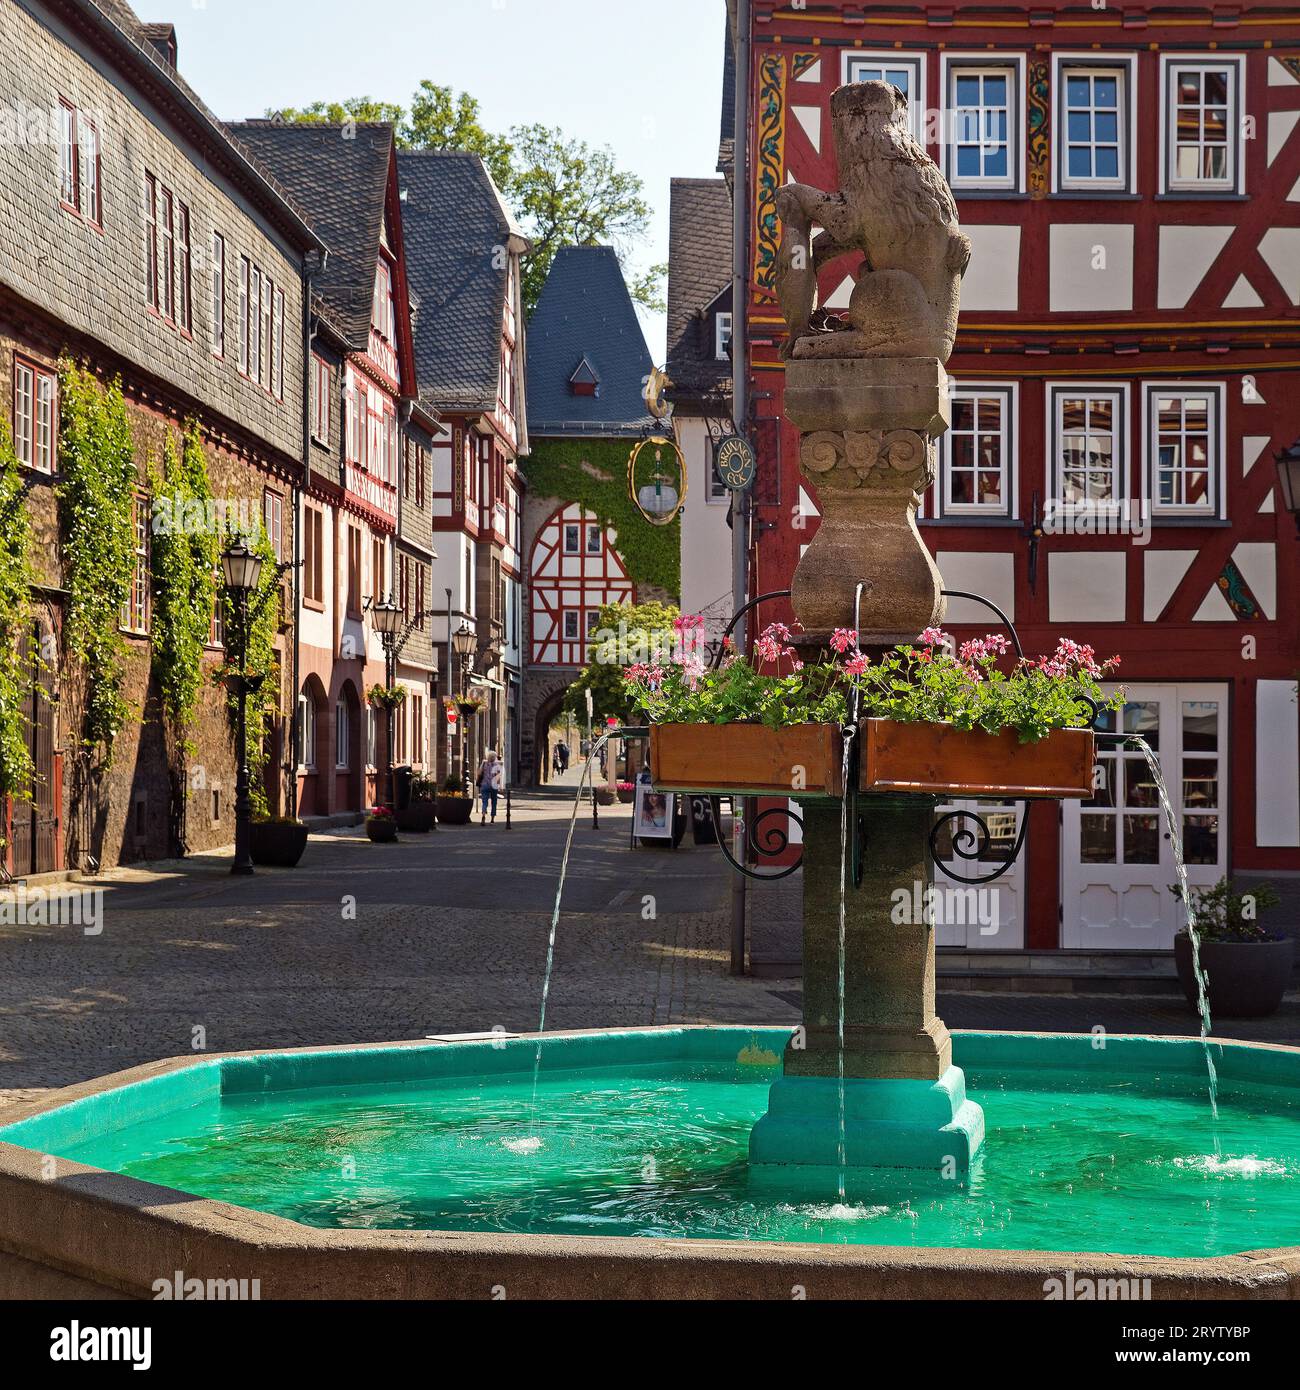 Market fountain at Buttermarkt in front of half-timbered house, Herborn, Hesse, Germany, Europe Stock Photo